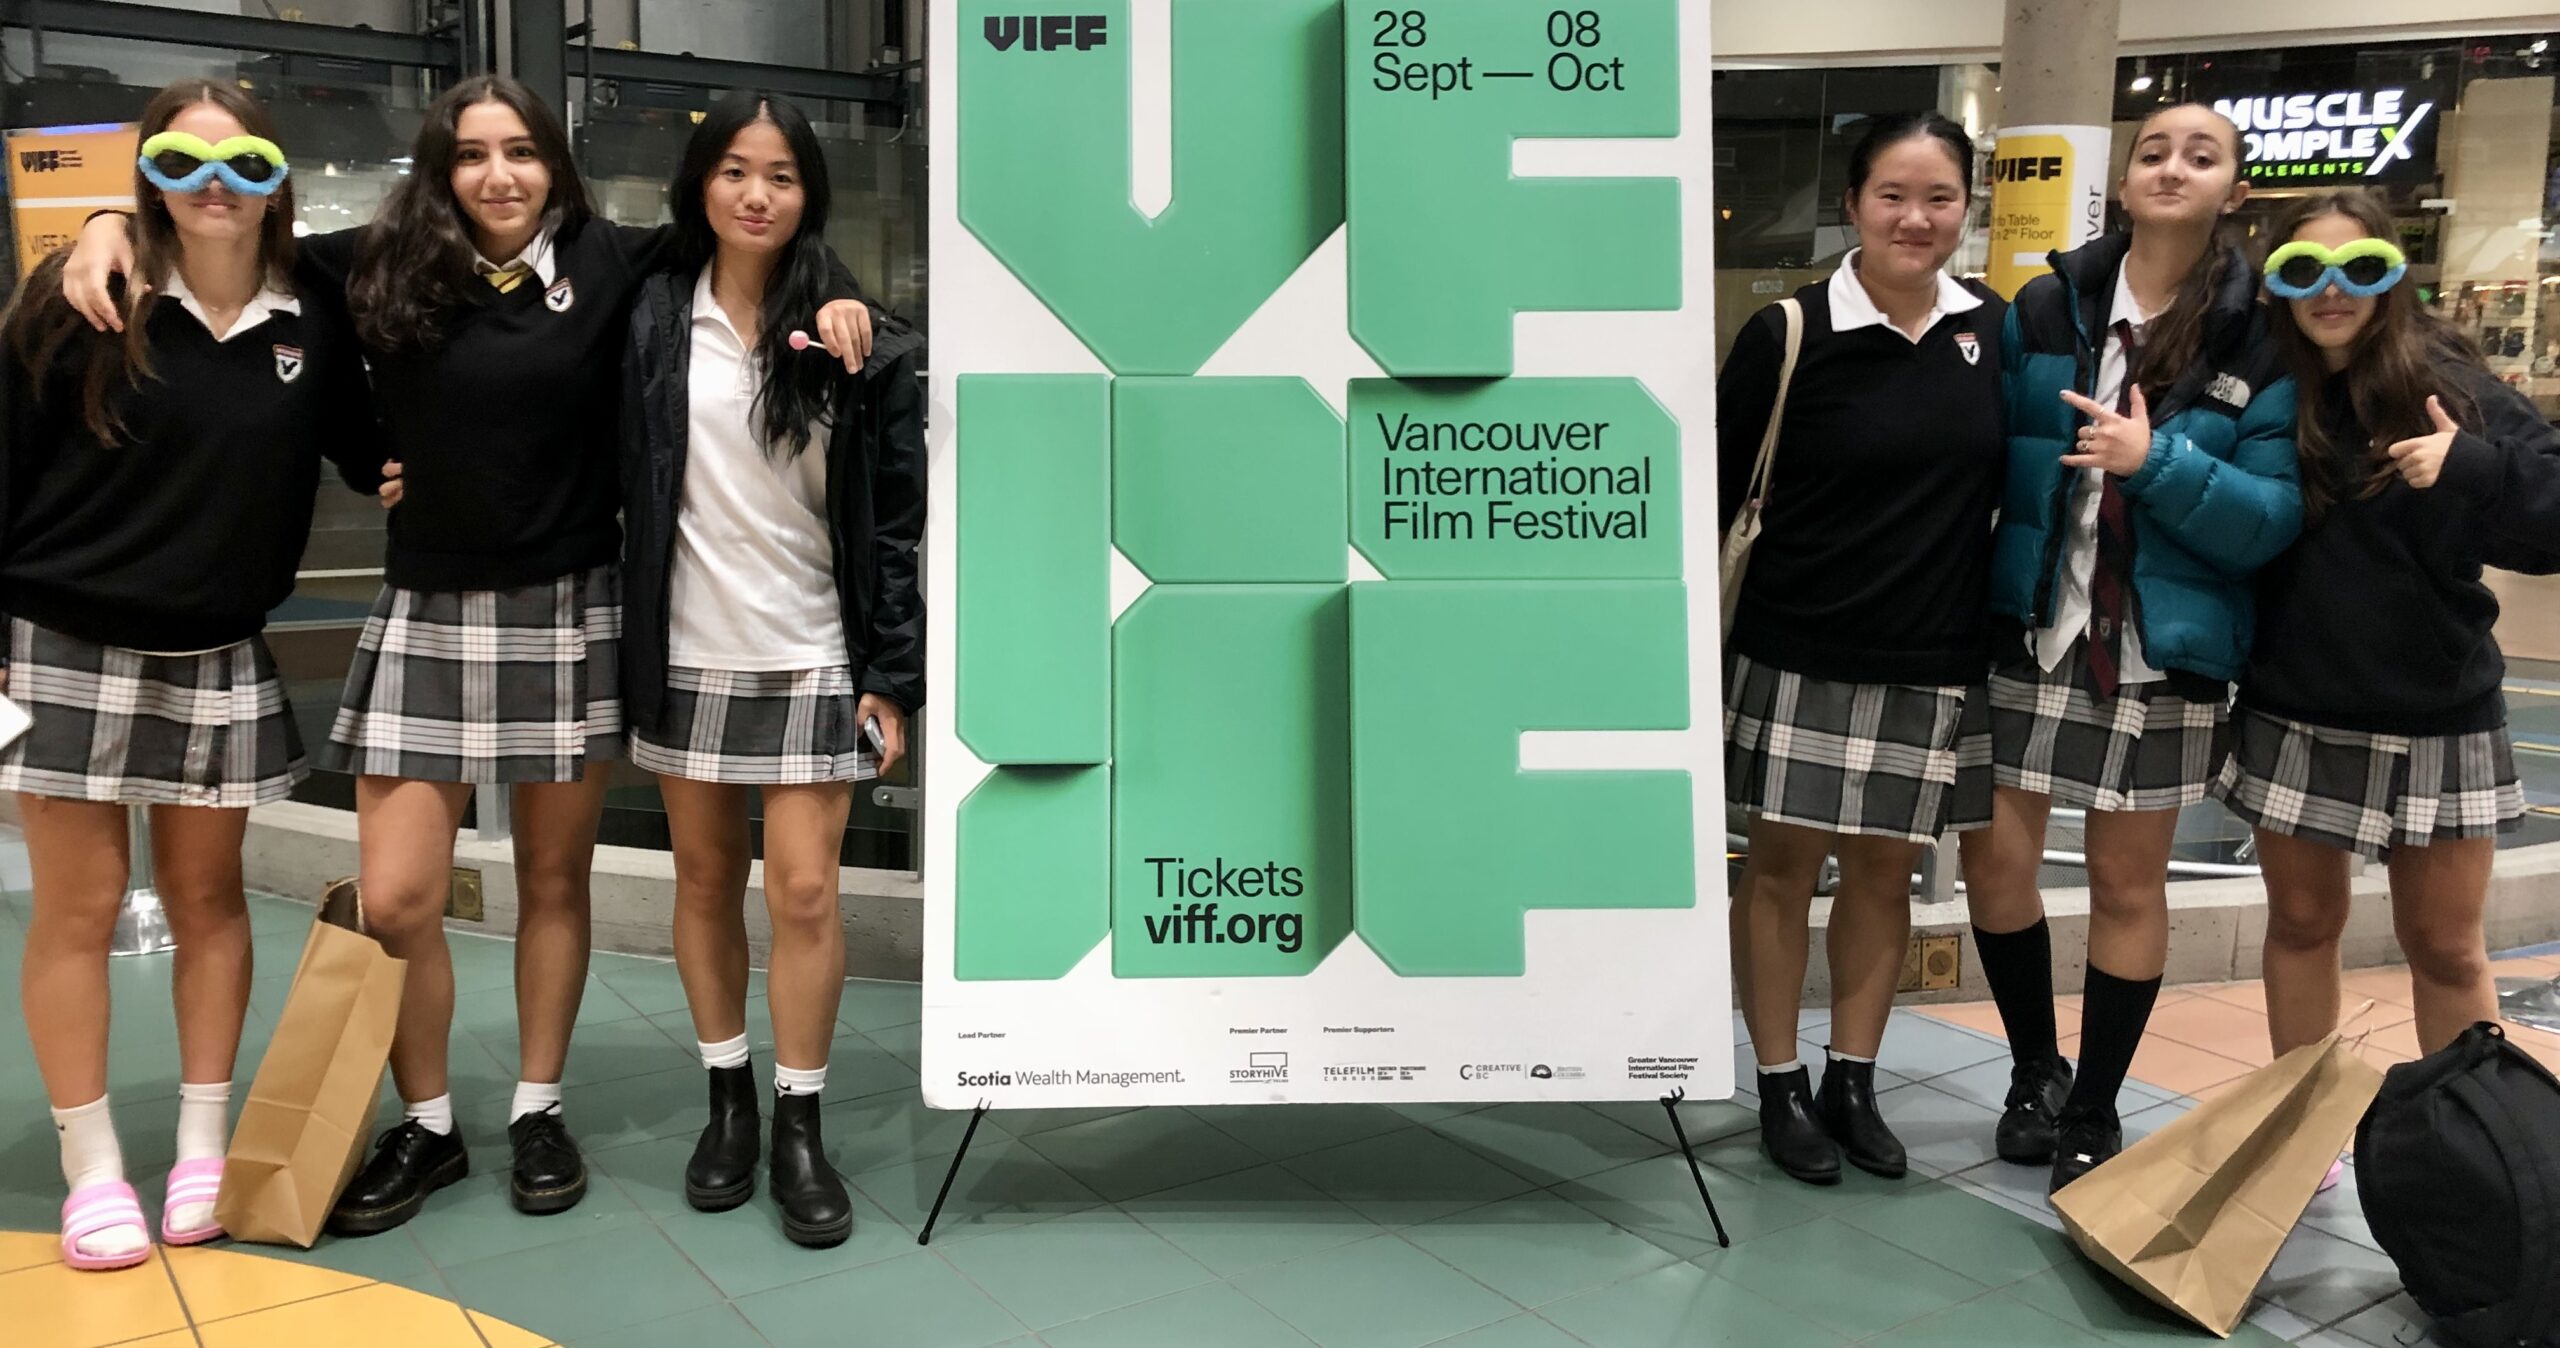 Business Students Attend VIFF to Learn About Regenerative Agriculture